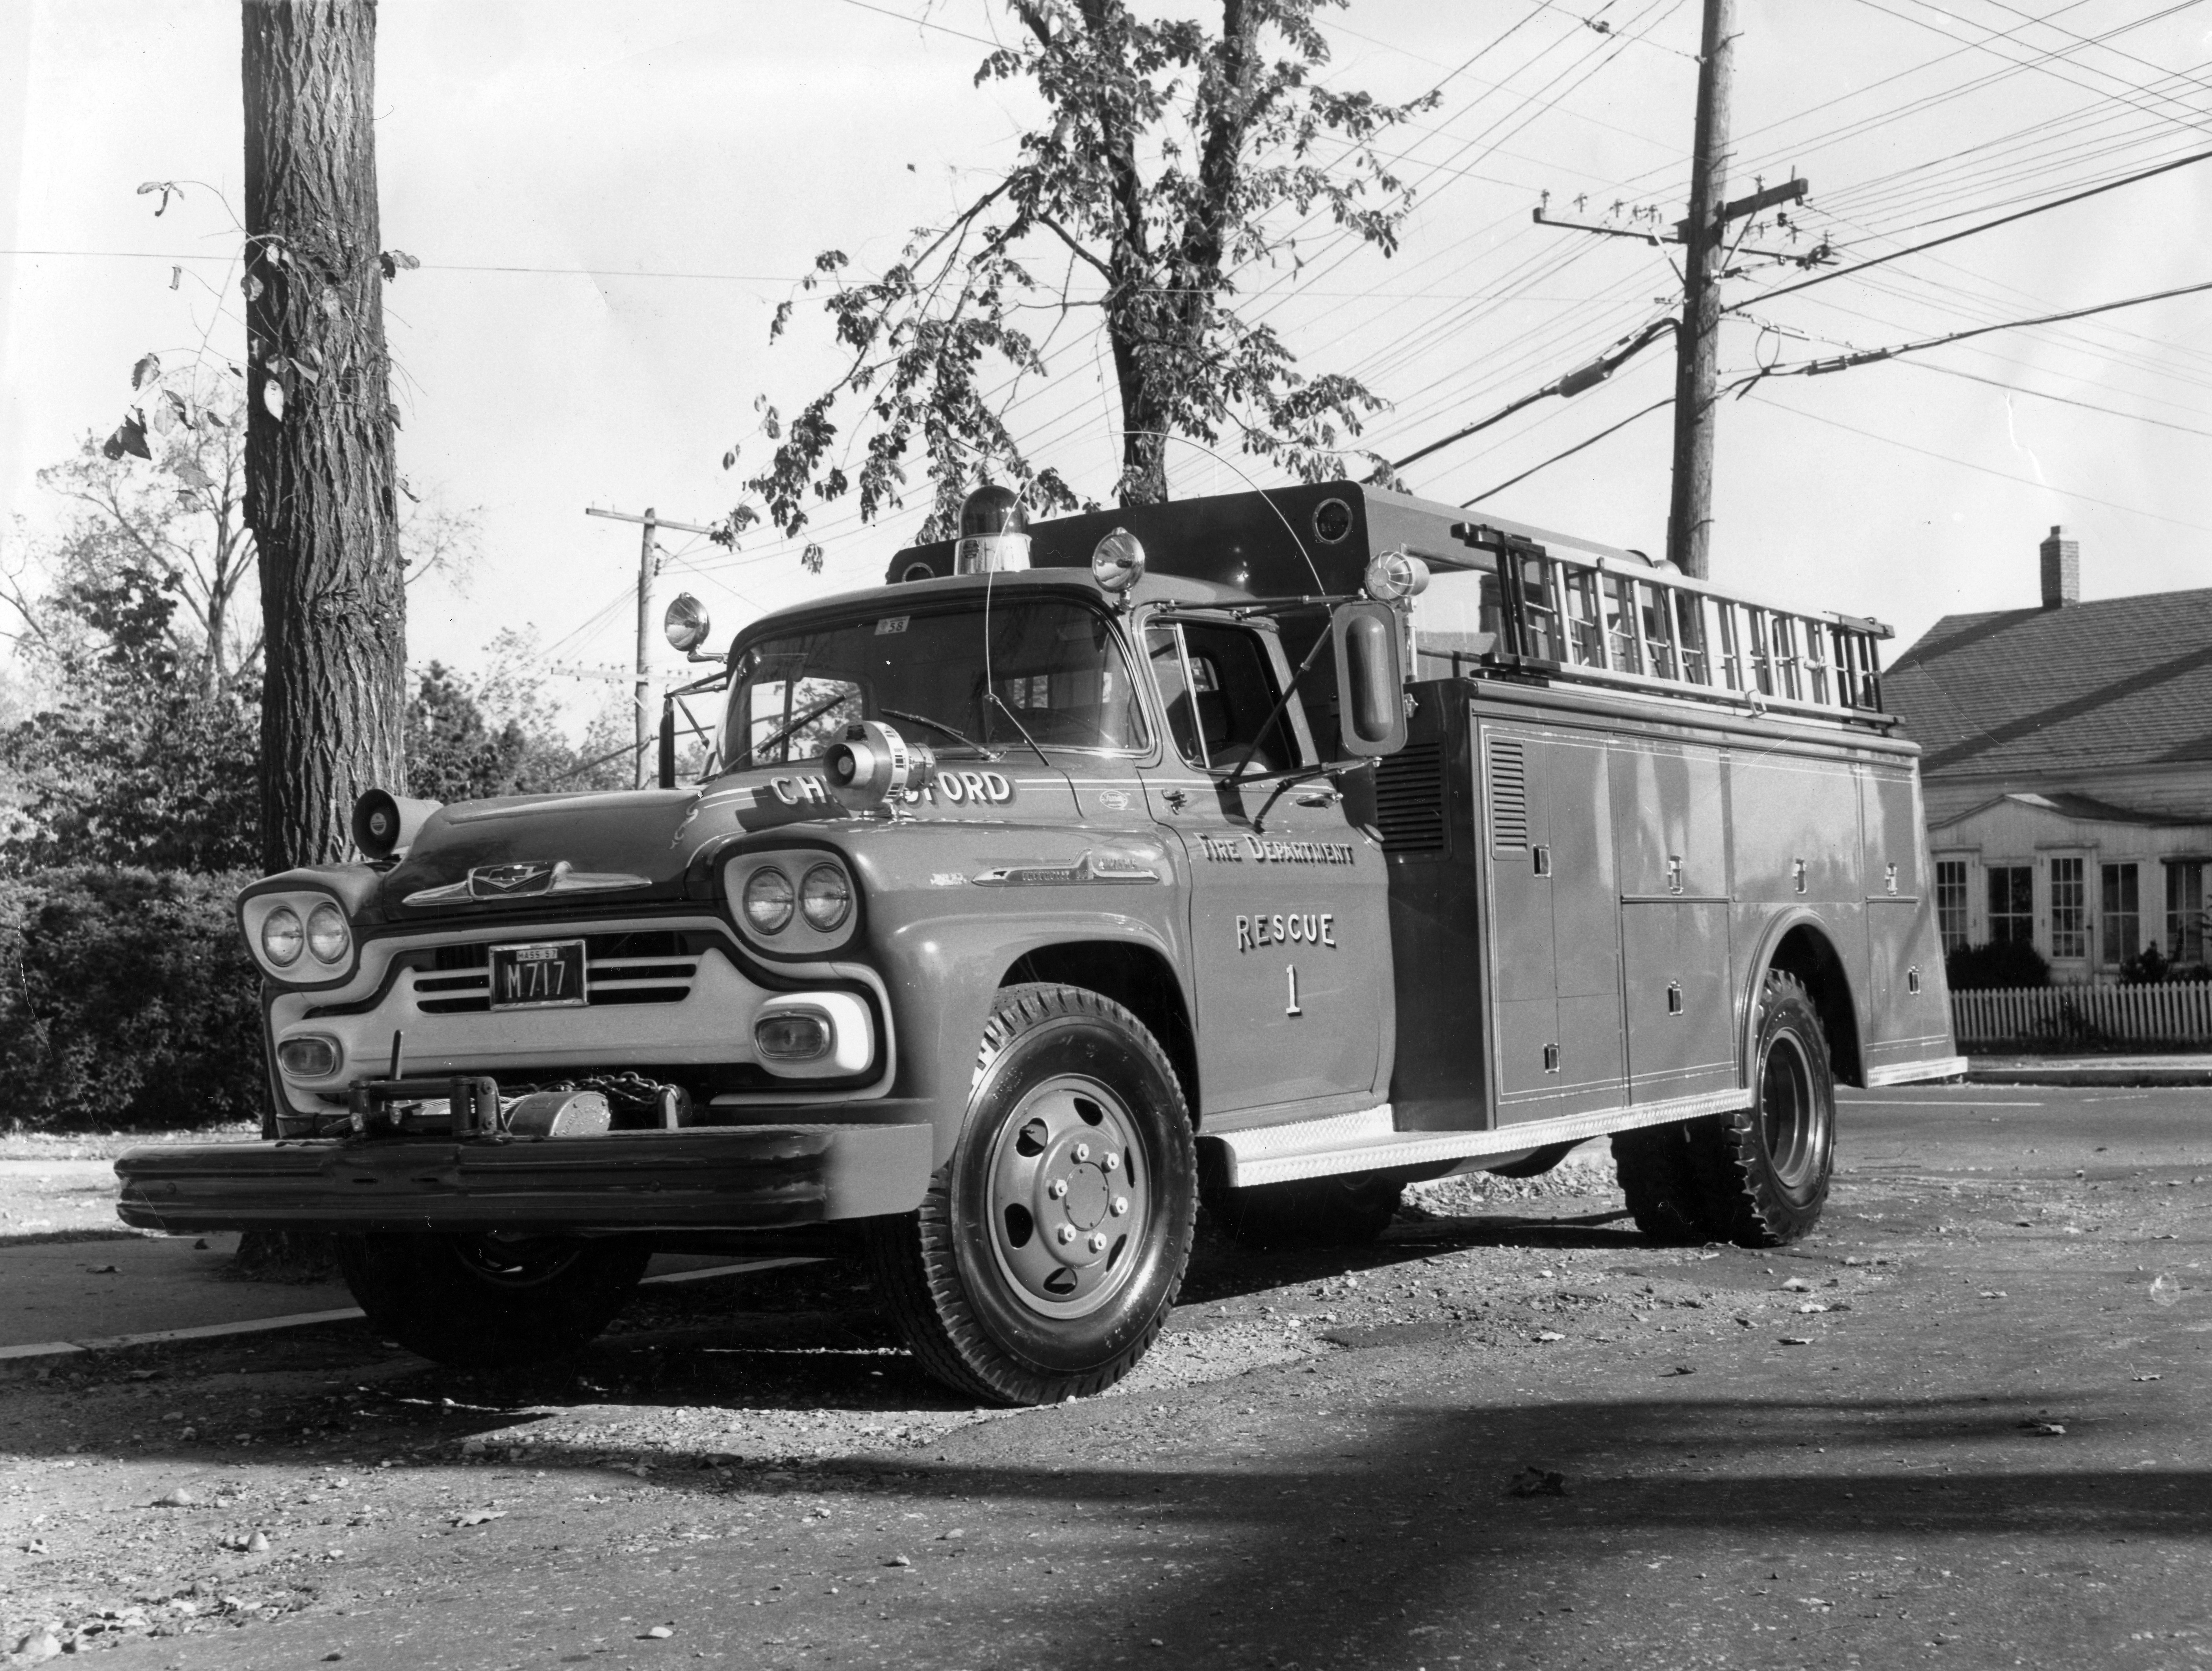 1958 Rescue Truck parked by Chelmsford Common